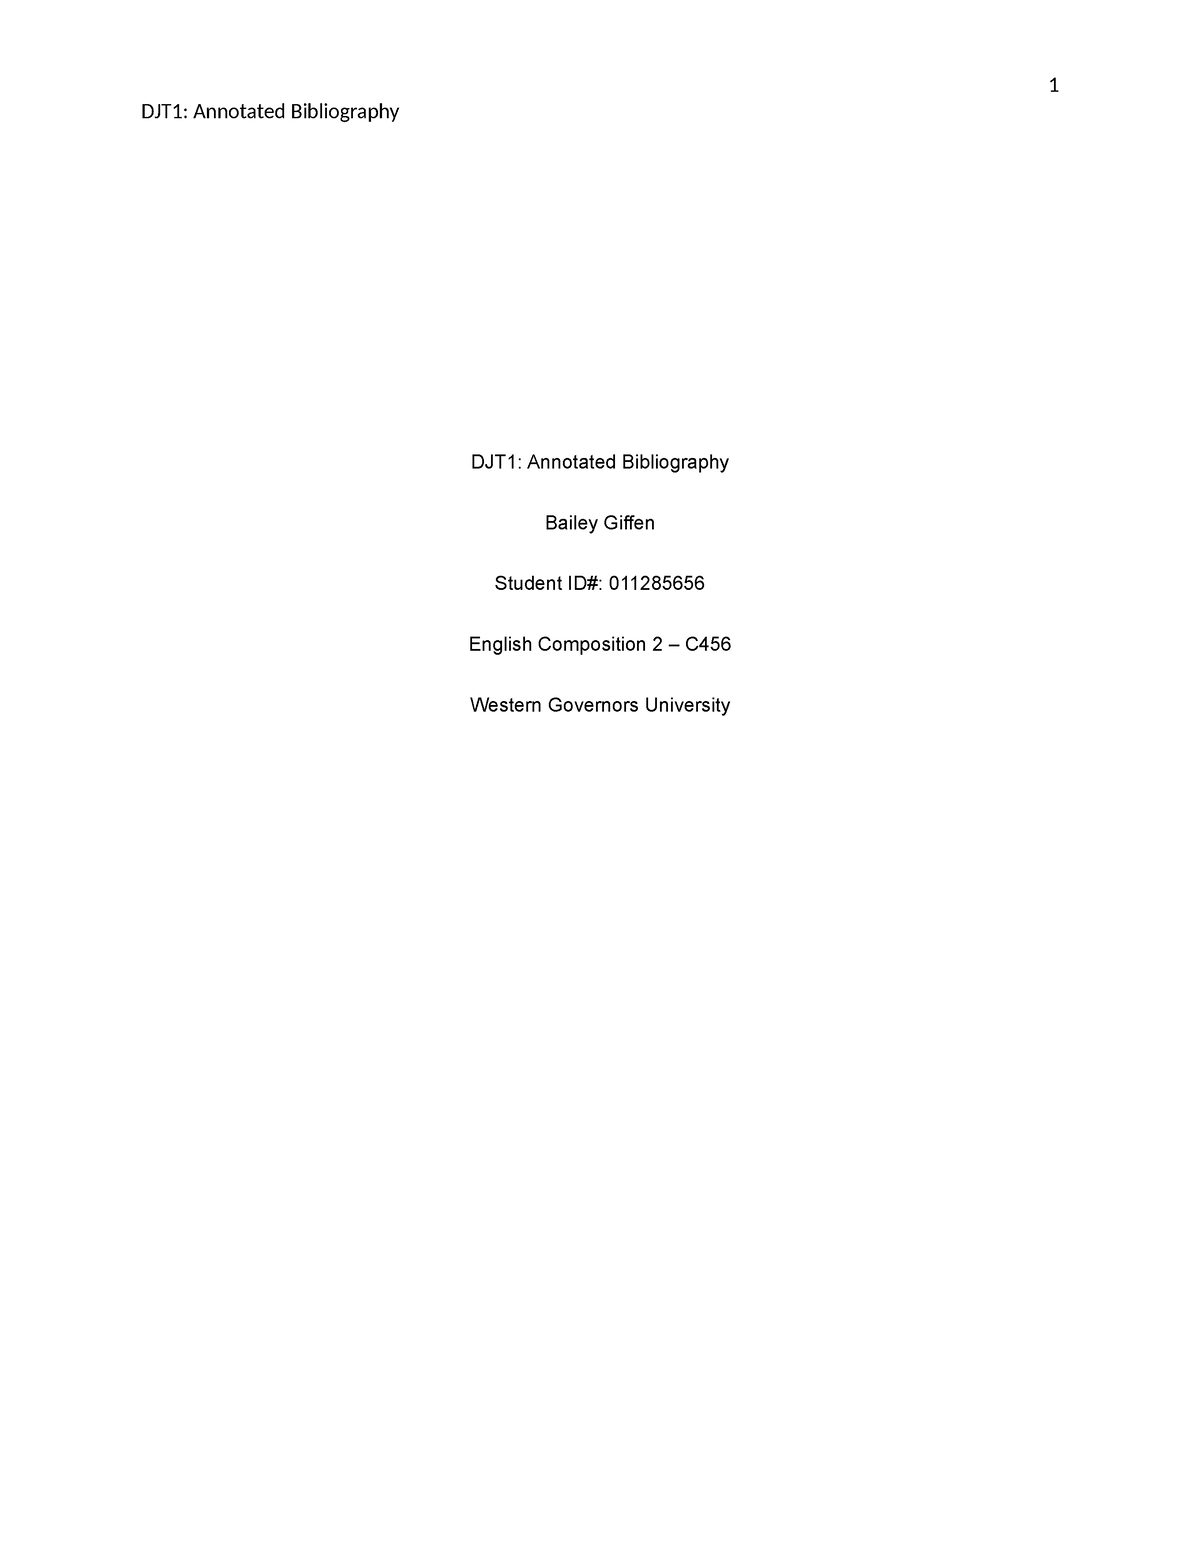 Annotated Bibliography - DJT1: Annotated Bibliography DJT1: Annotated ...